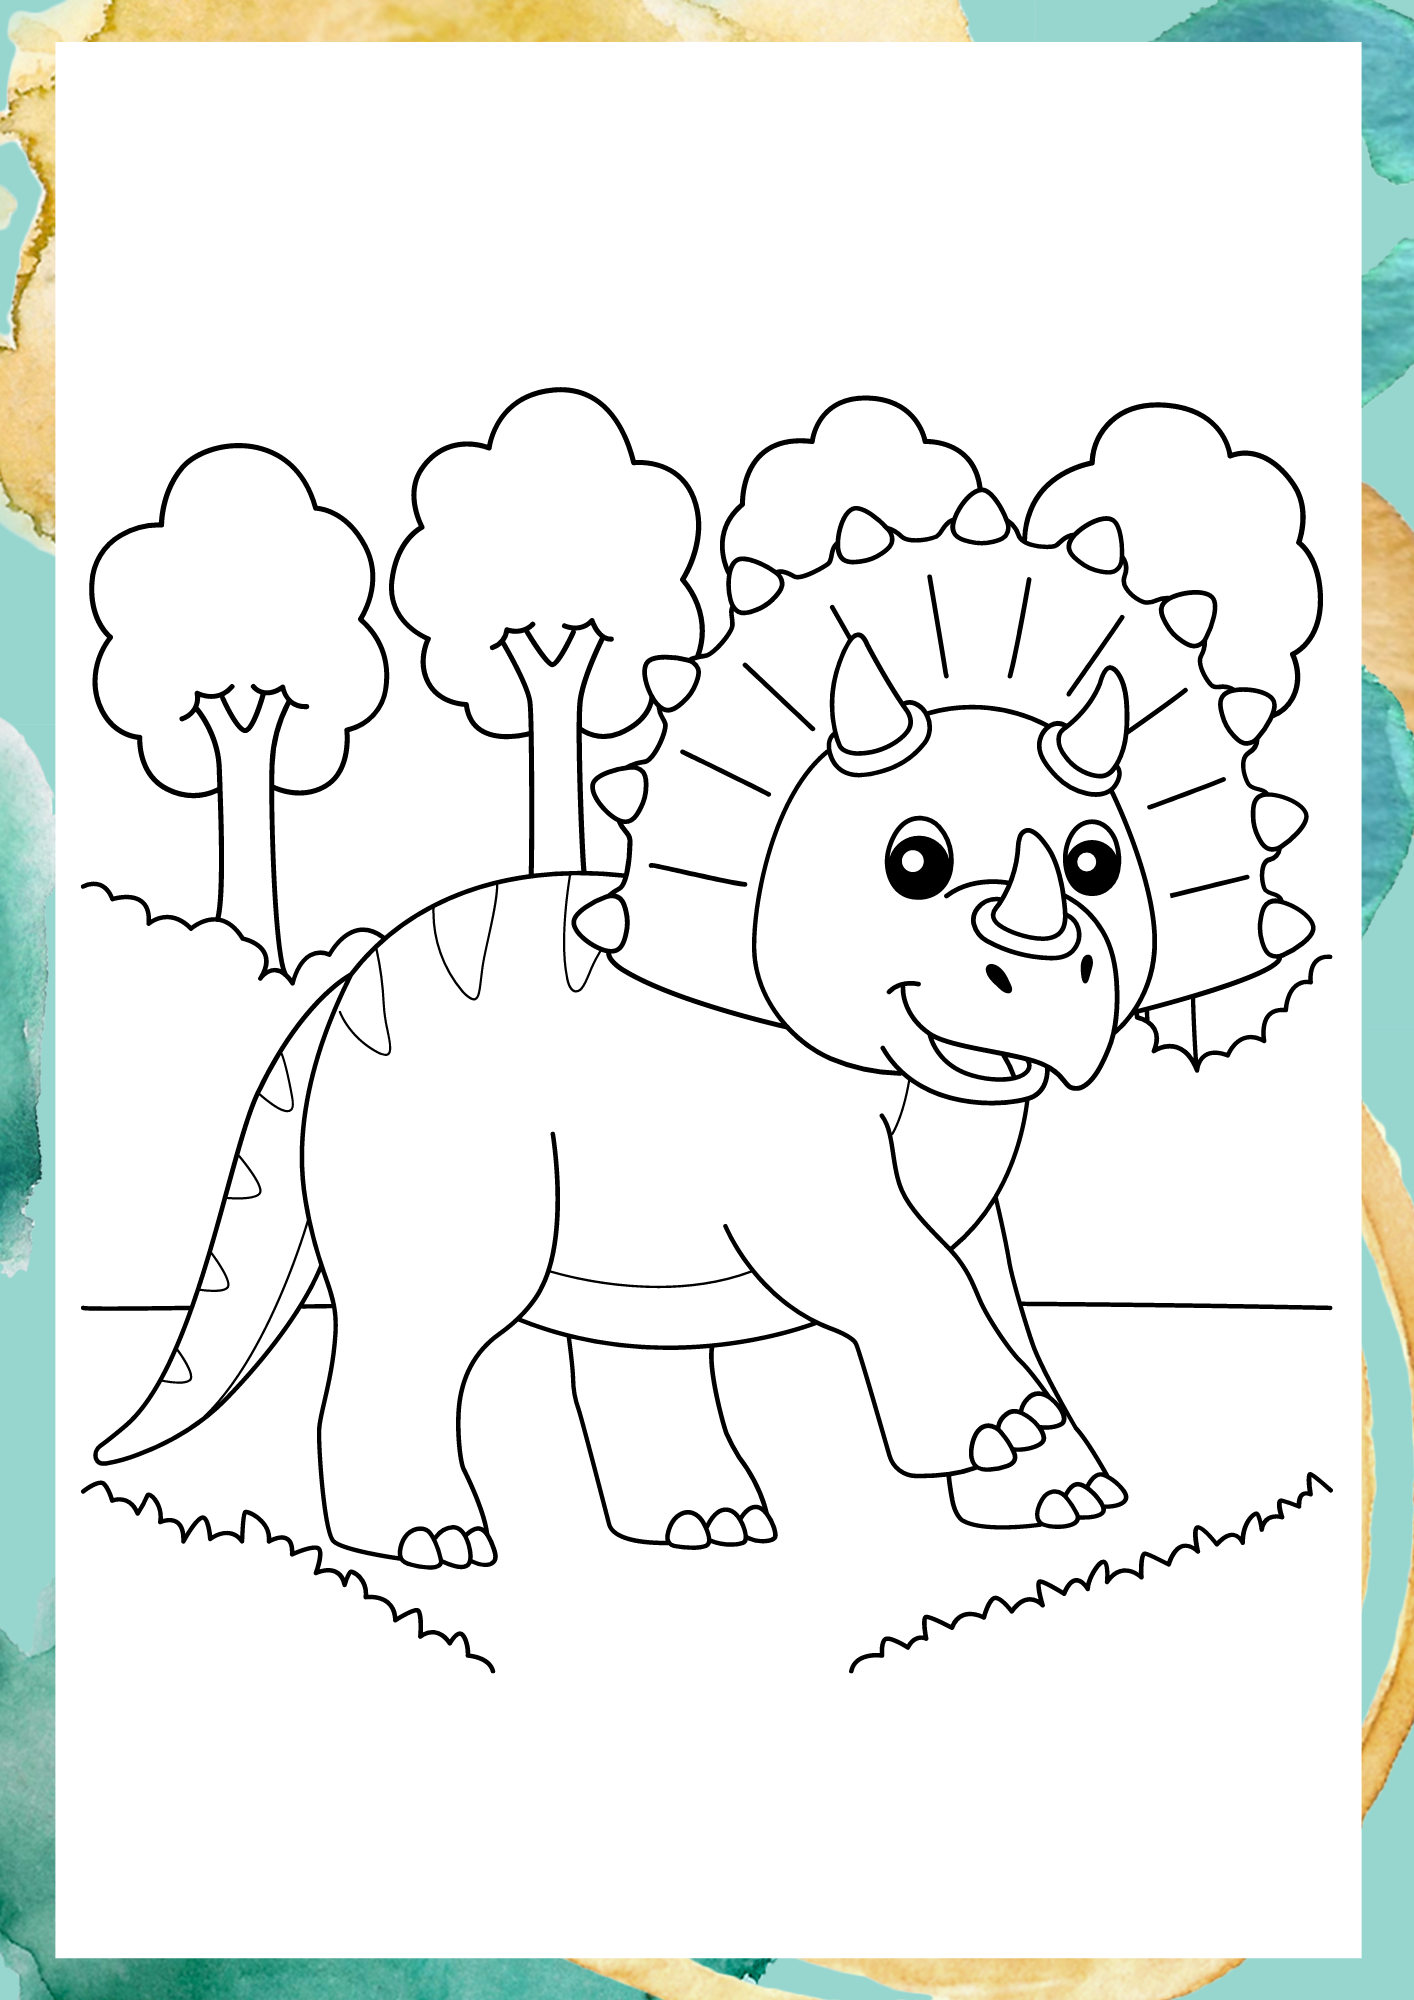 Dinasaur coloring pages, coloring page, coloring page for toddlers, Coloring Page, coloring sheet, happy color, colouring, free coloring pages, coloring pages for kids, printable coloring pages, cute coloring pages, colouring pages, colouring to print, free printable coloring pages, free coloring pages for kids, easy coloring pages, coloring sheets